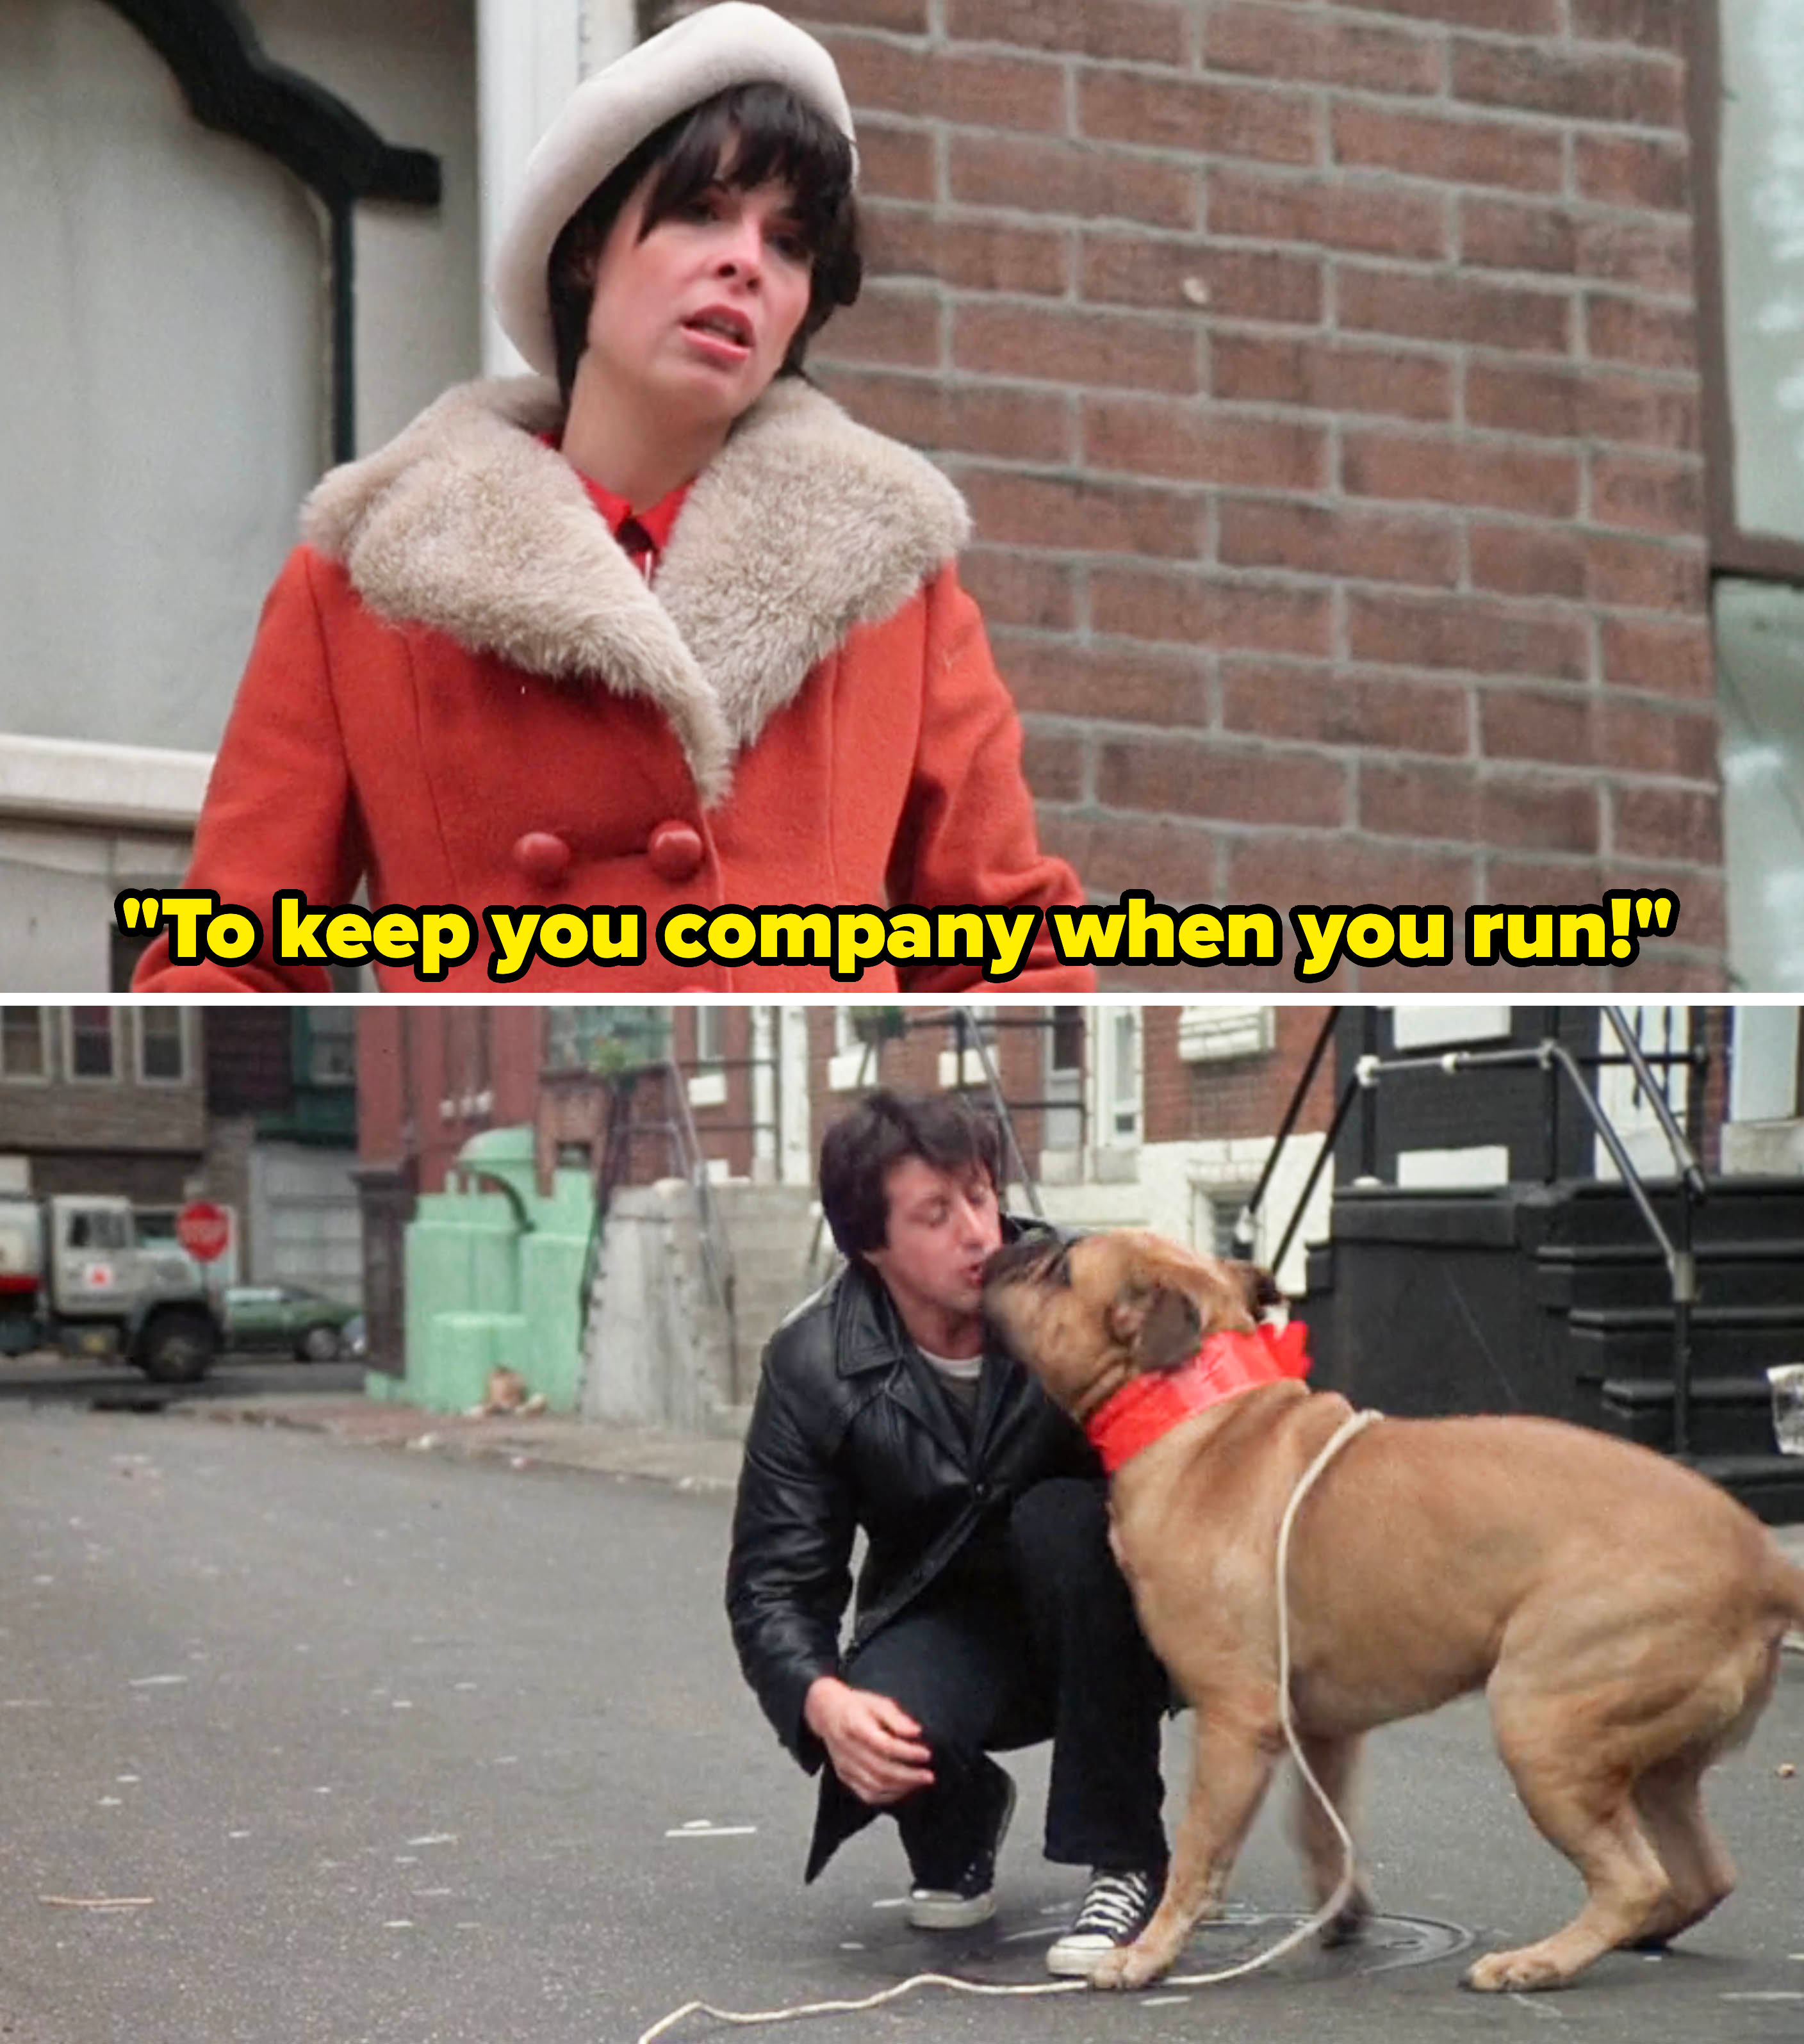 Two scenes from Rocky with Adrian wearing a white hat and red coat, and Rocky with Butkus the dog